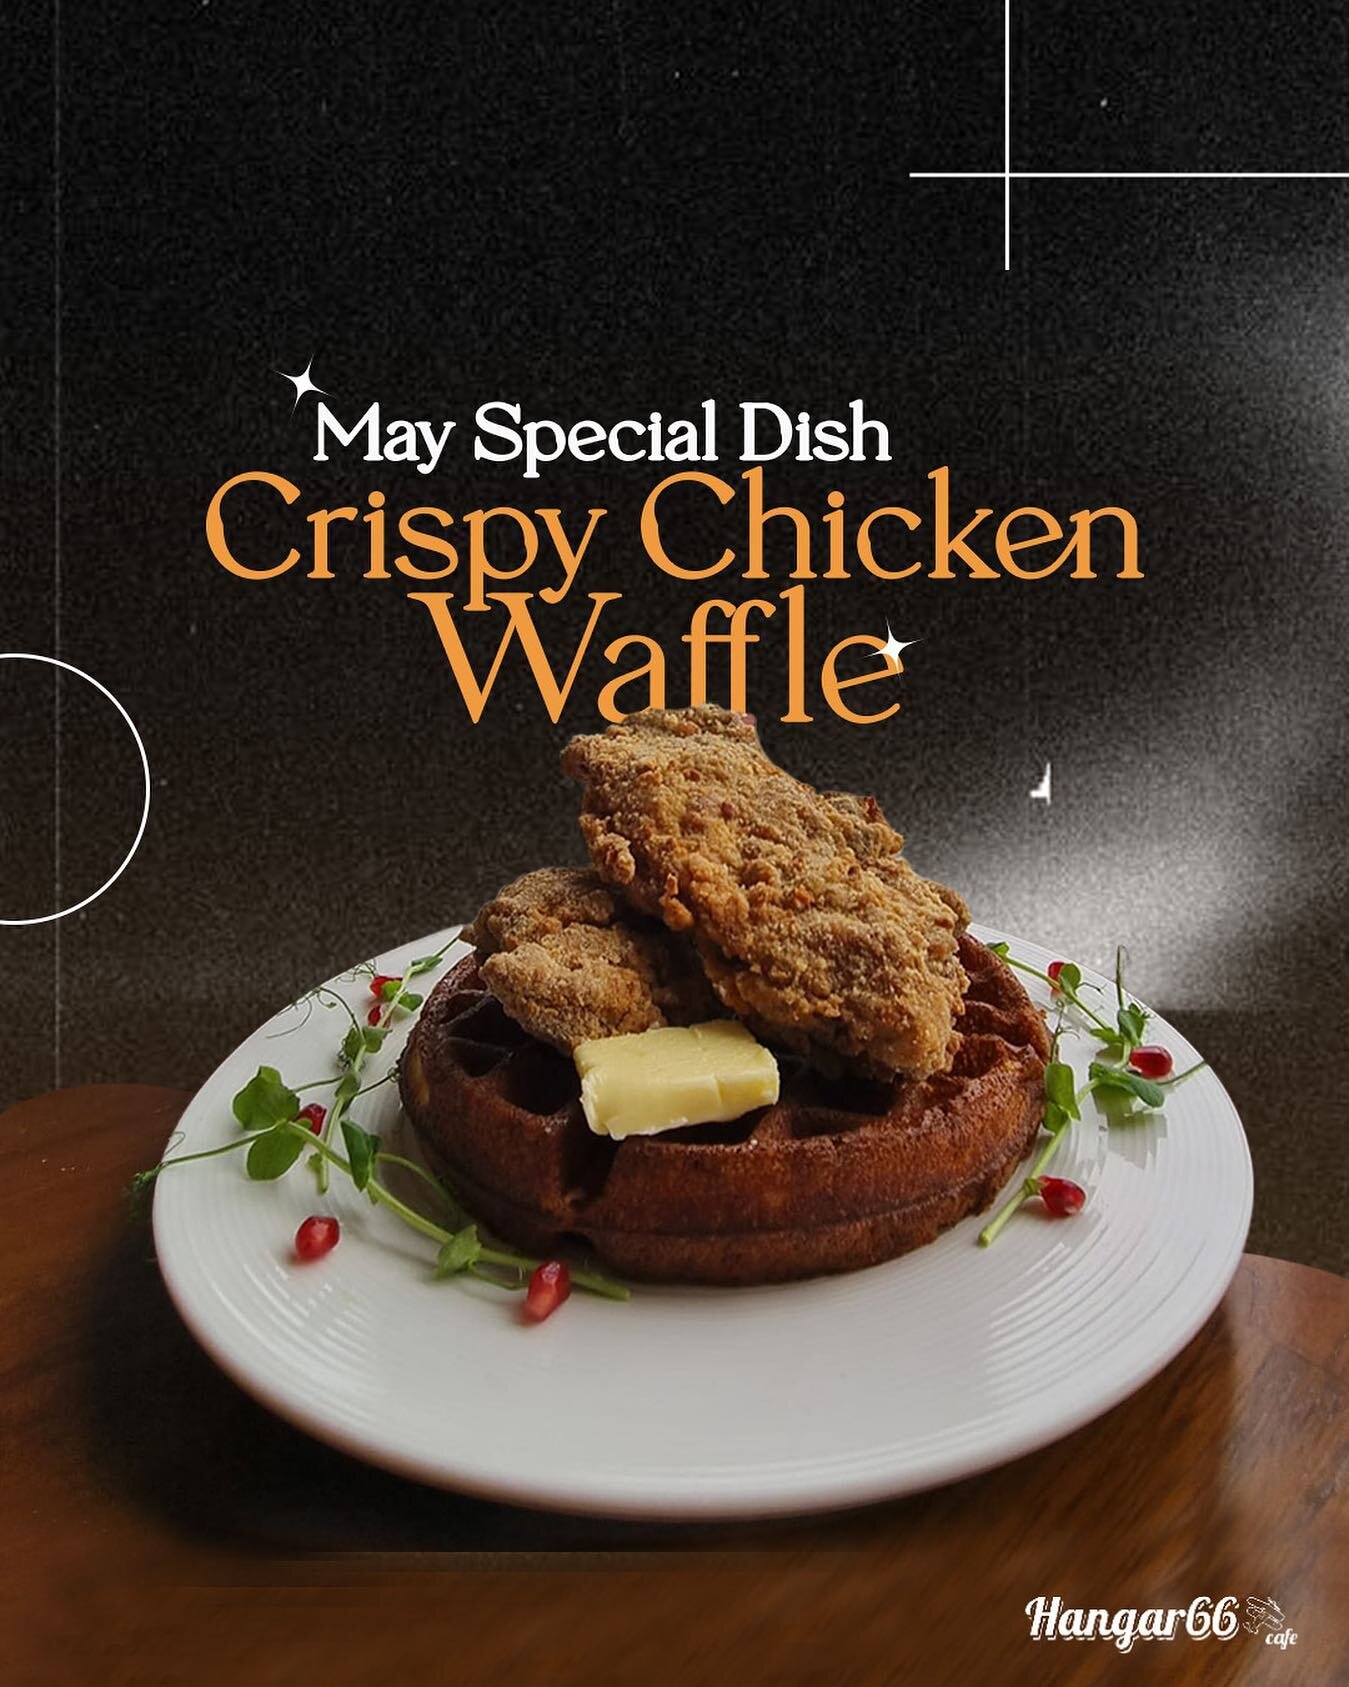 Get ready for some finger-lickin' goodness this May with our Crispy Chicken Waffle special at only $18.66! 

Our homestyle fried chicken served on our famous 🧇 thick Belgian waffle is the perfect combination of sweet and savoury. Drizzled with 🍁 ma